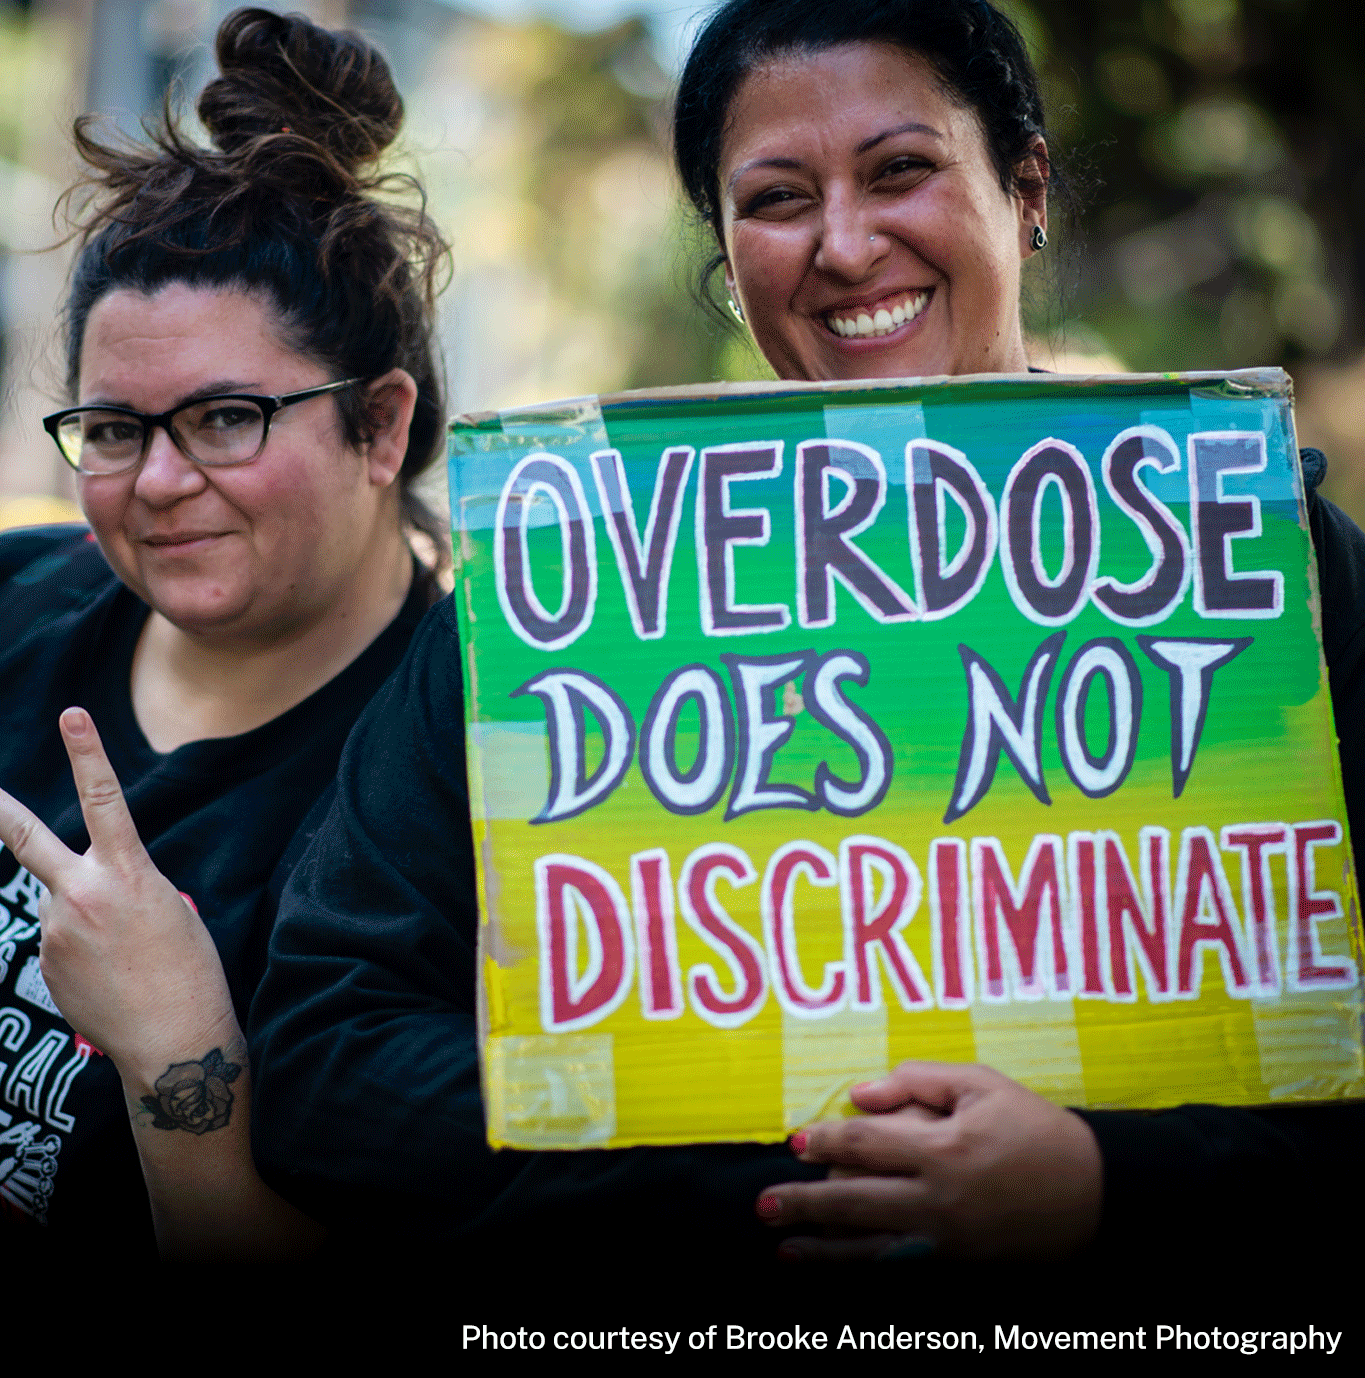 Two people pose together. Person at left smiles while making peace sign hand gesture. They have black shirt on that reads in part, “RADICAL LOVE” with red flowers. They have a tattoo of a flower near their left wrist. Person at right wears black sweatshirt and smiles while holding sign reading, OVERDOSE DOES NOT DISCRIMINATE.